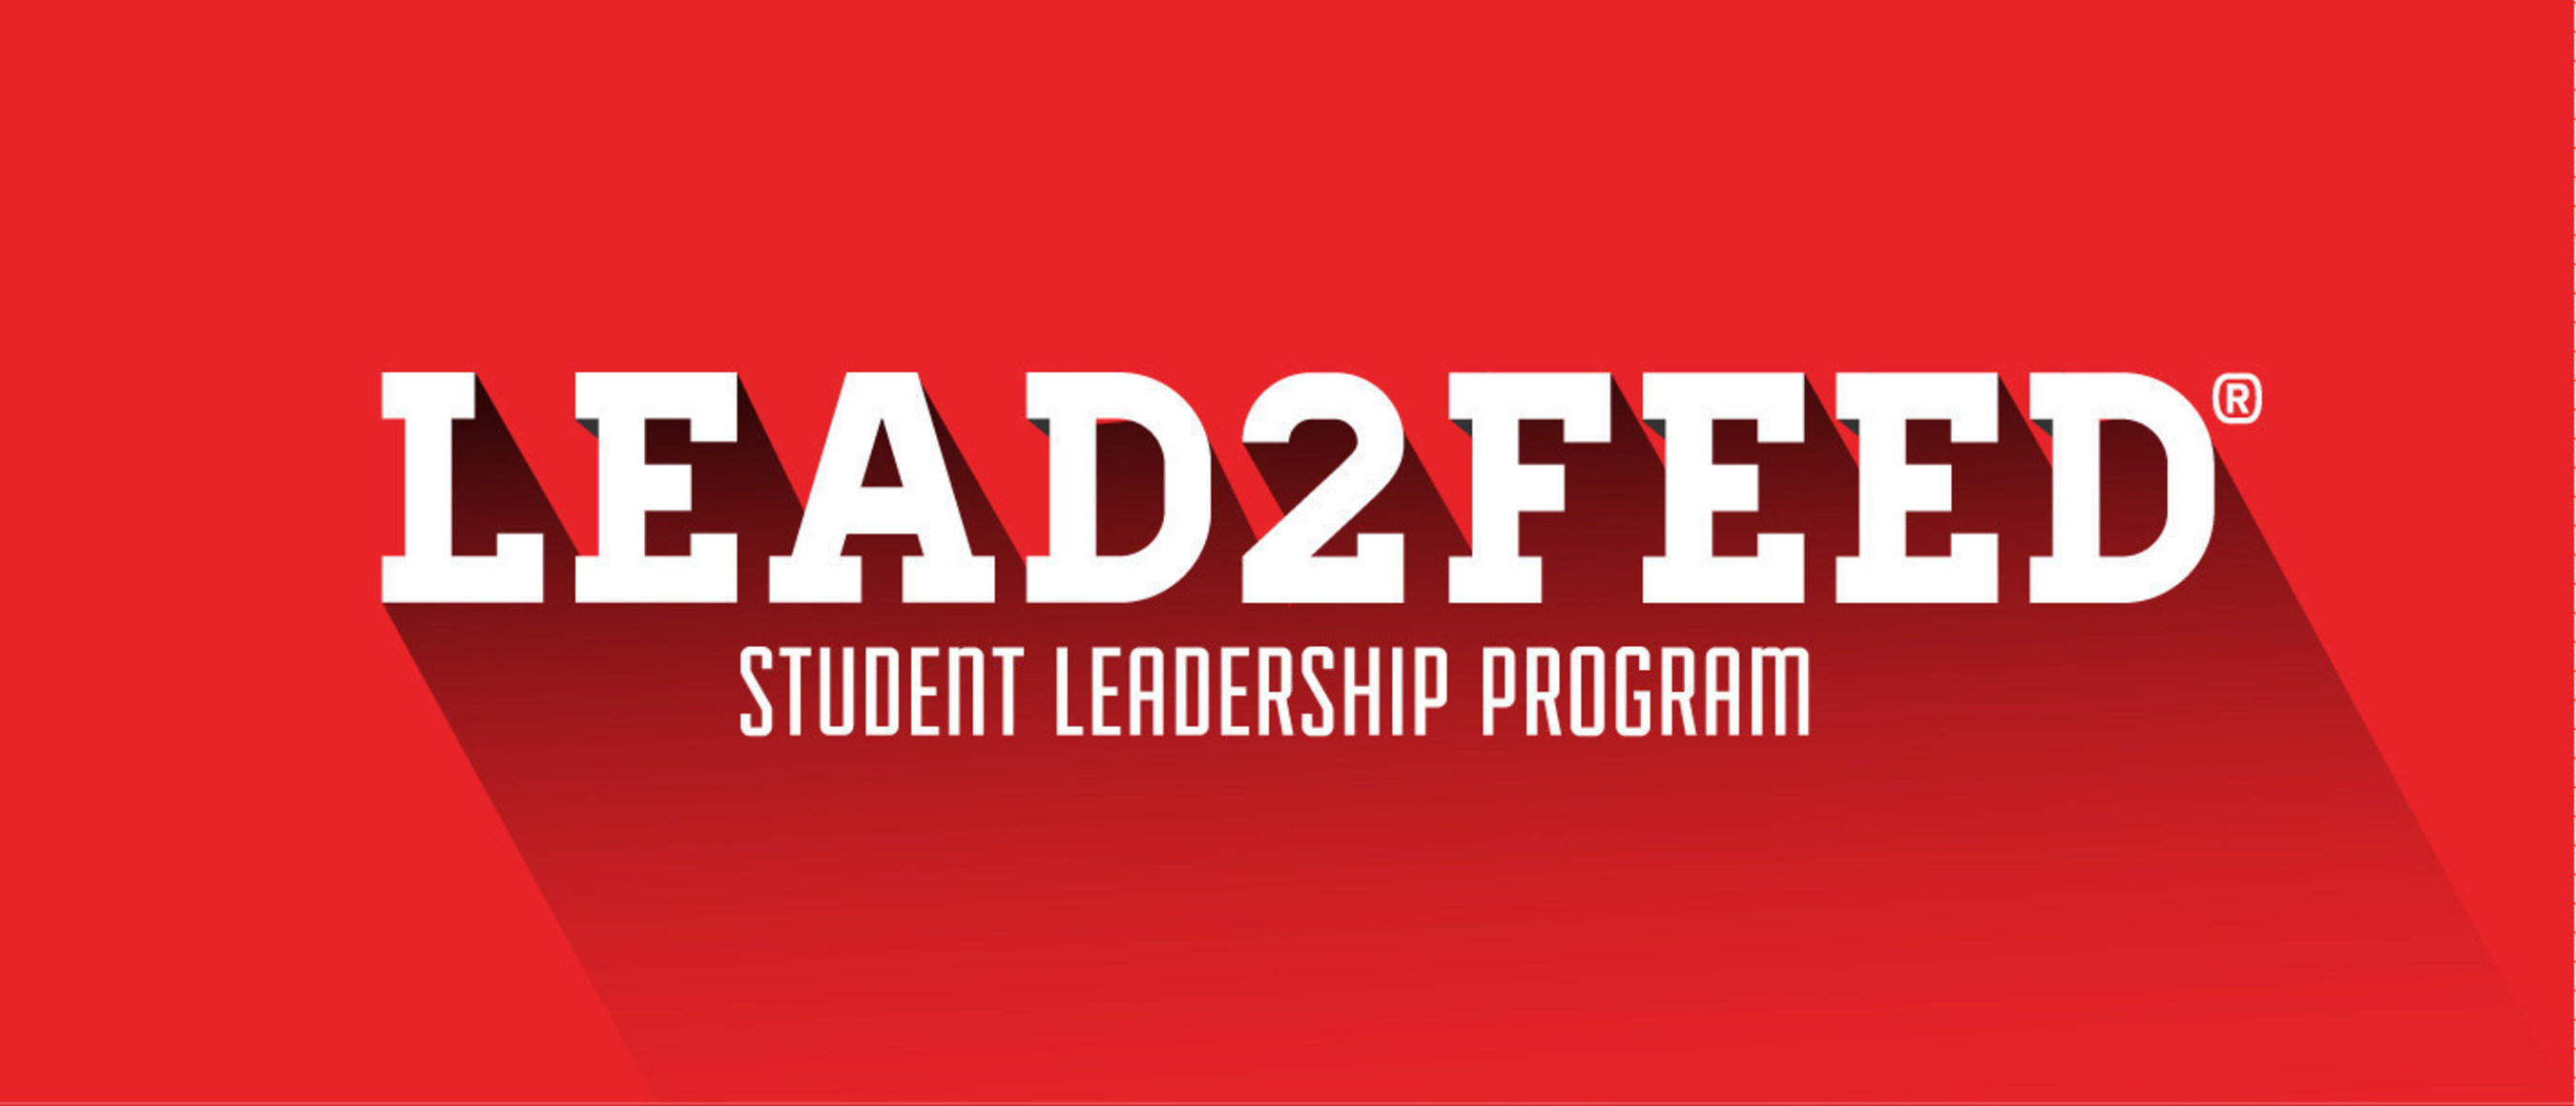 Lead2Feed Student Leadership Program Mobilizes One Million Students to Feed the Need in Communities Across America. Student-led leadership projects awarded $275,000 in grant prizes for U.S. non-profits and $170,000 in technology packages for winning schools.